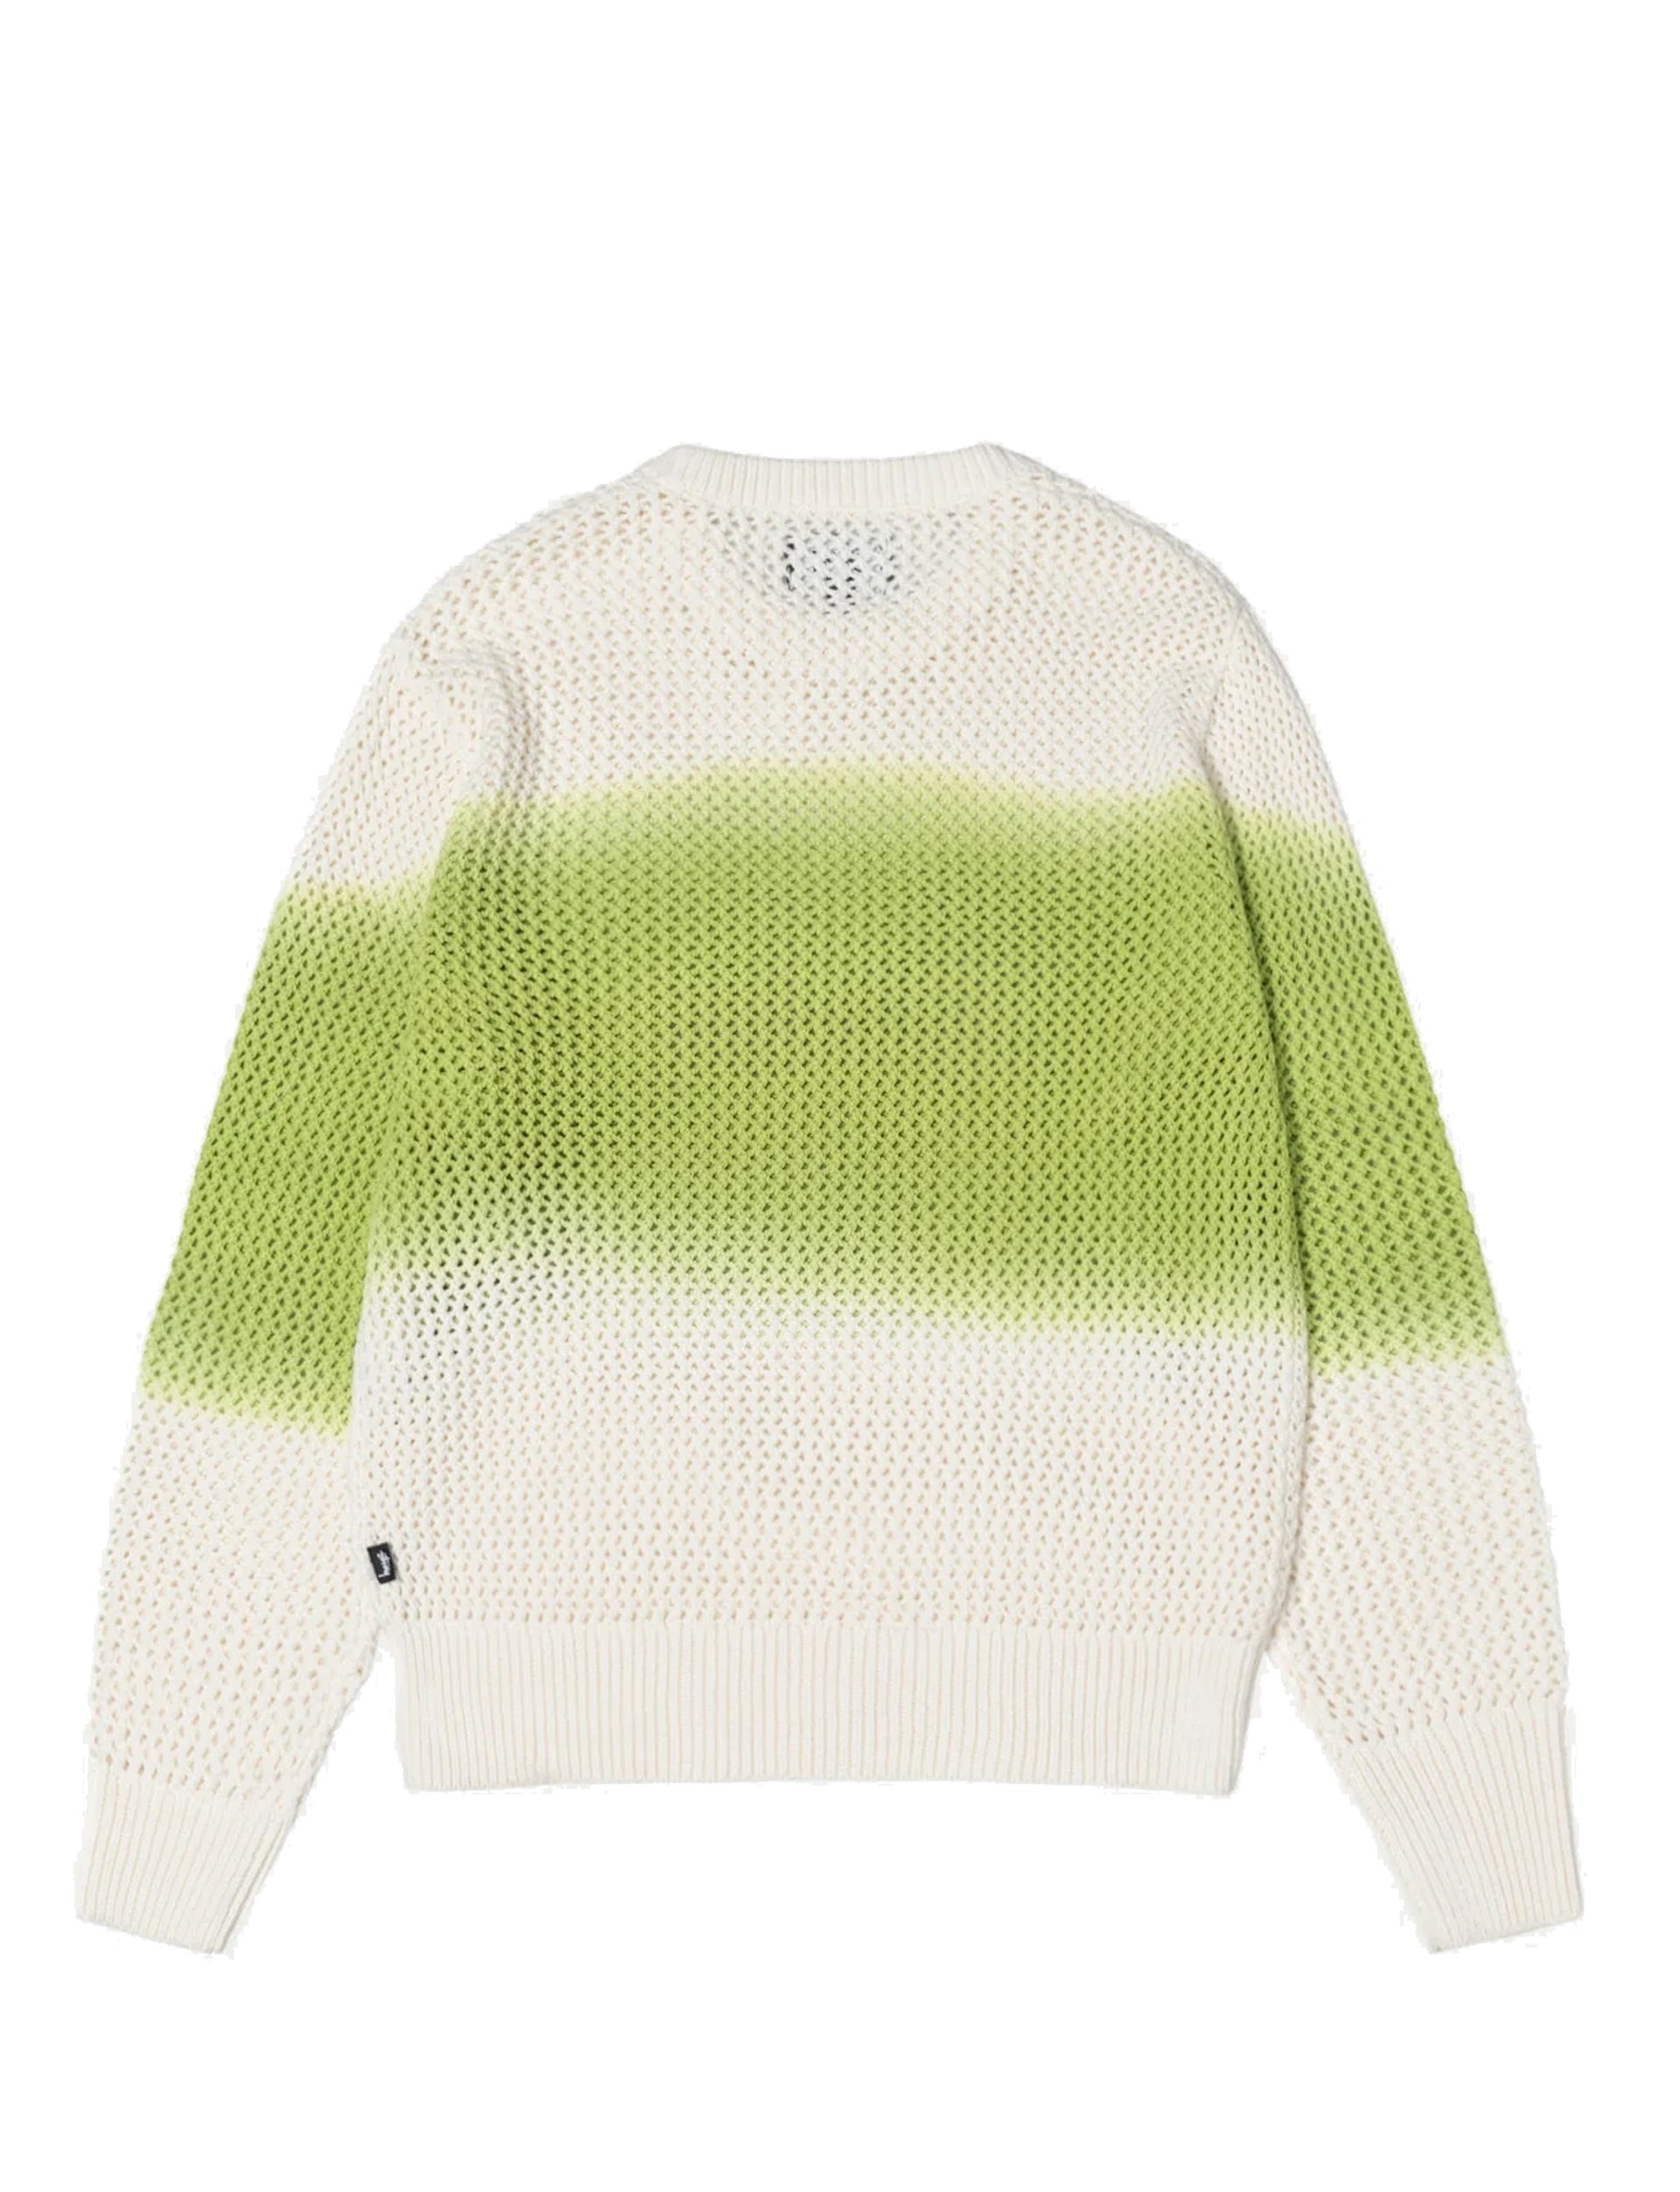 STÜSSY PIGMENT DYED LOOSE GAUGE SWEATER BRIGHT GREEN